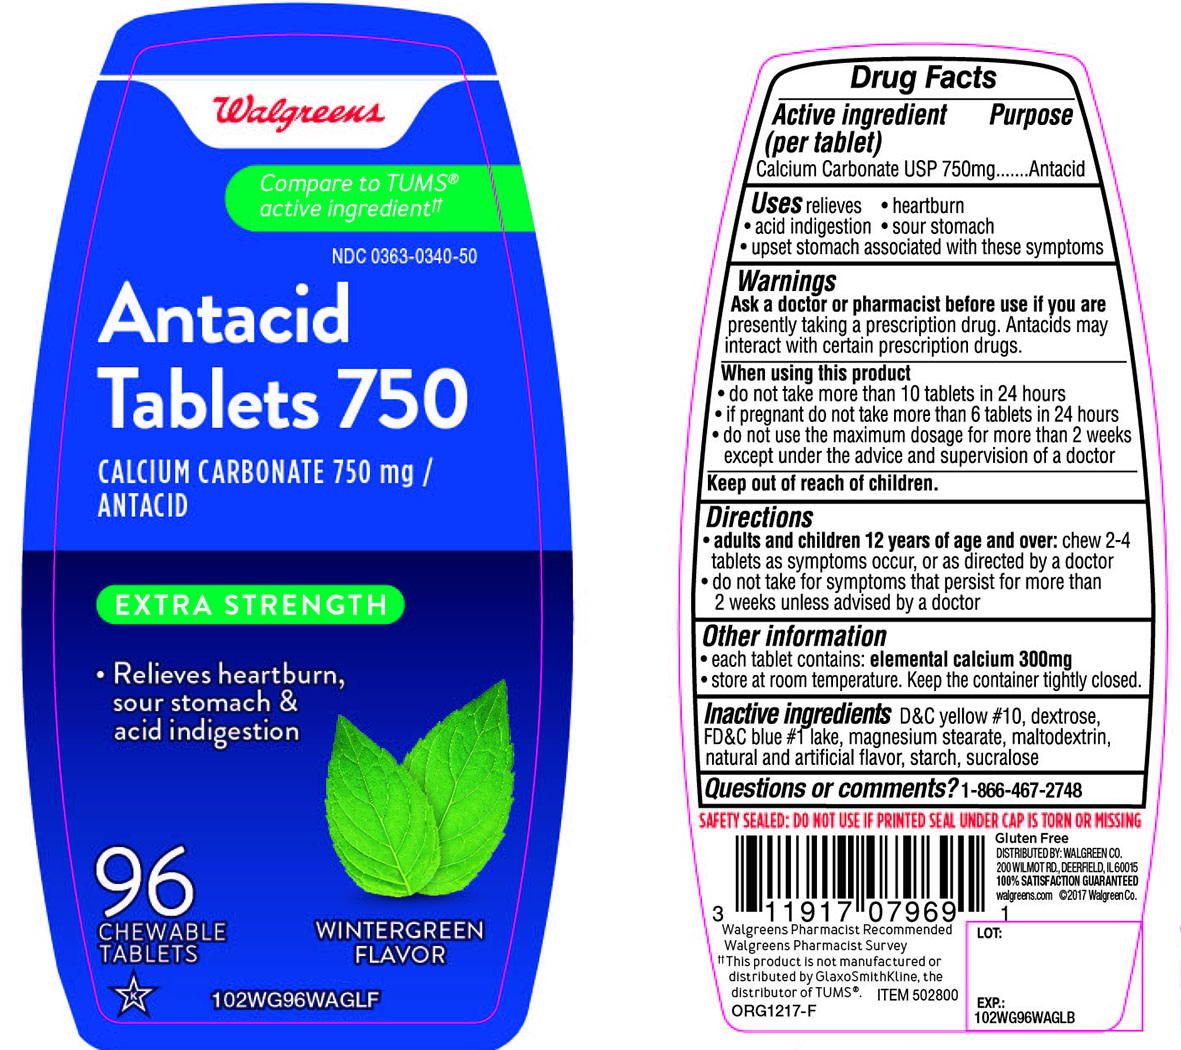 Walgreens Antacid Tablets 750 Extra Strength Wintergreen 96 Chewable Tablets  